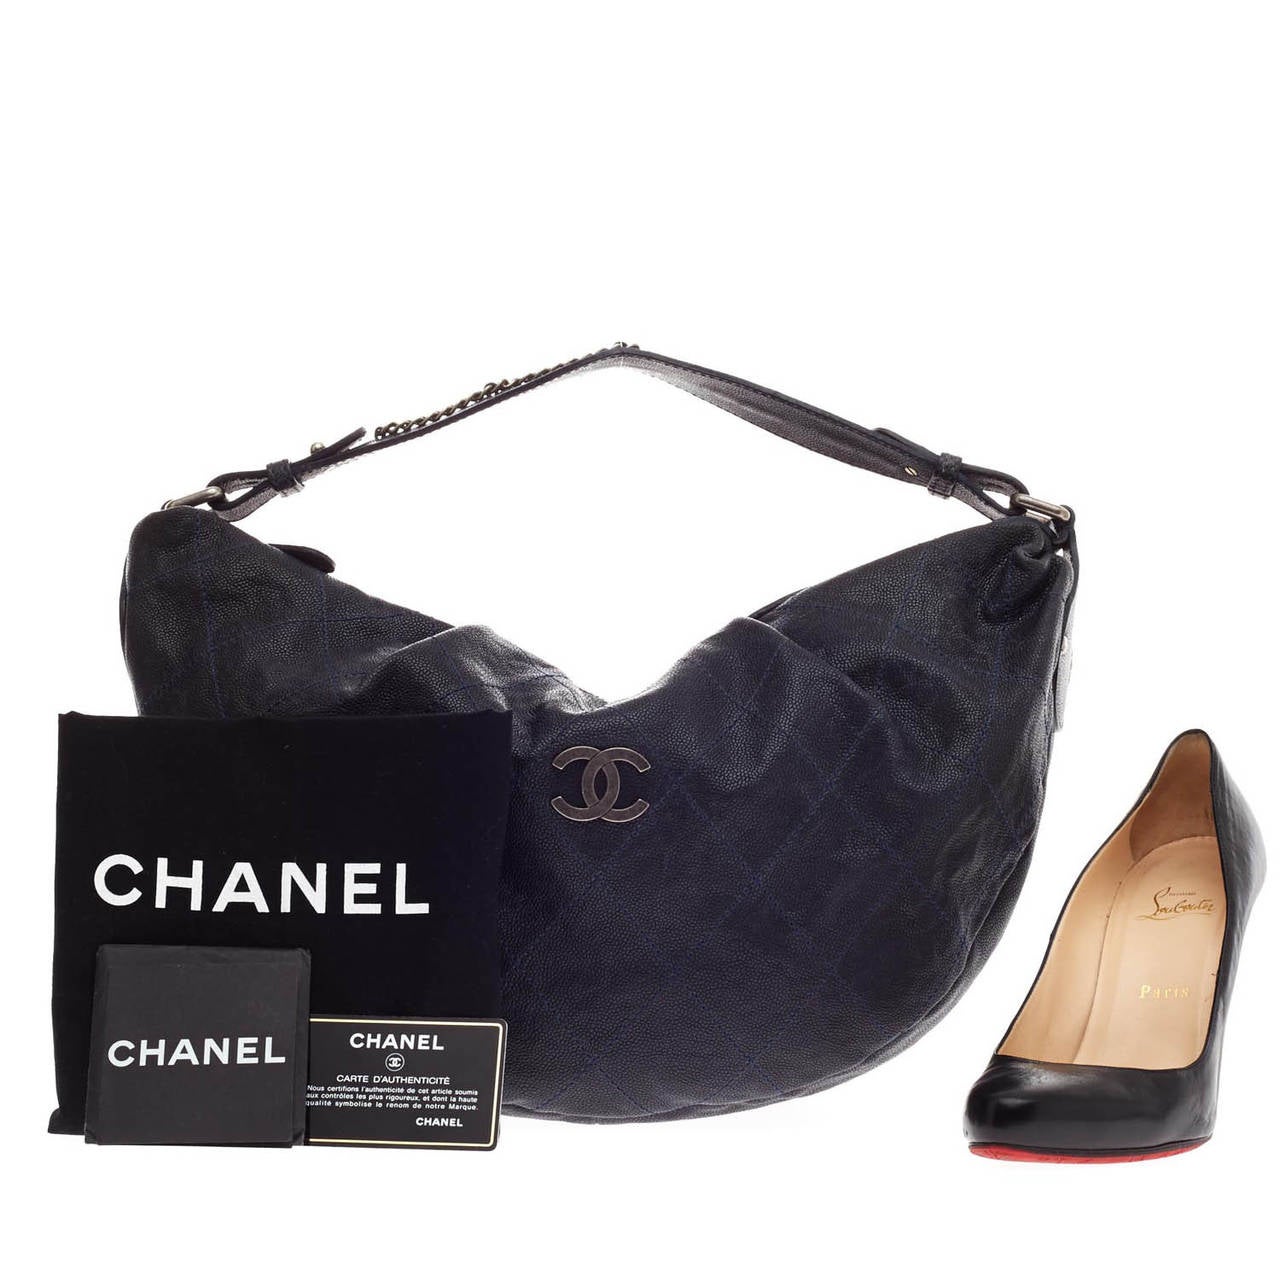 This authentic Chanel Outdoor Ligne Caviar Hobo is an understated beauty. Featuring a slouchy soft hobo silhouette and sleek midnight blue hue, this bag is easy-to-carry and perfect for everyday use. It is contrasted with stunning navy blue diamond